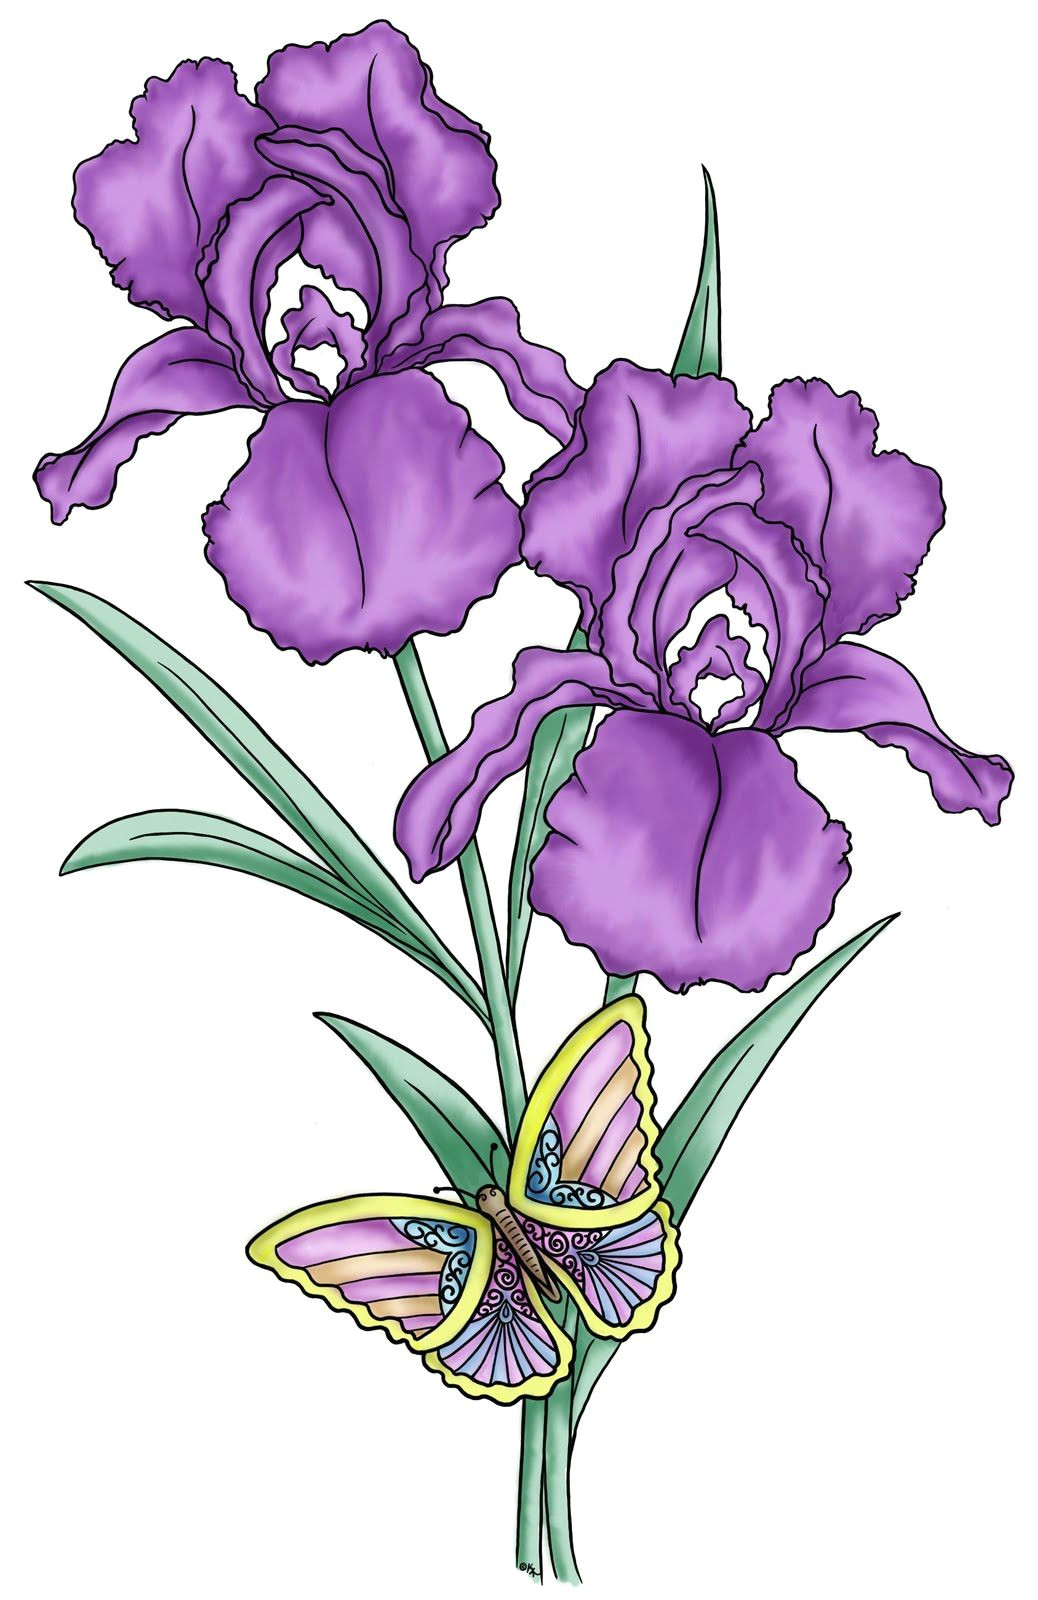 Drawing Of Purple Flowers the Iris Flower is Of Interest as An Example Of the Relation Between